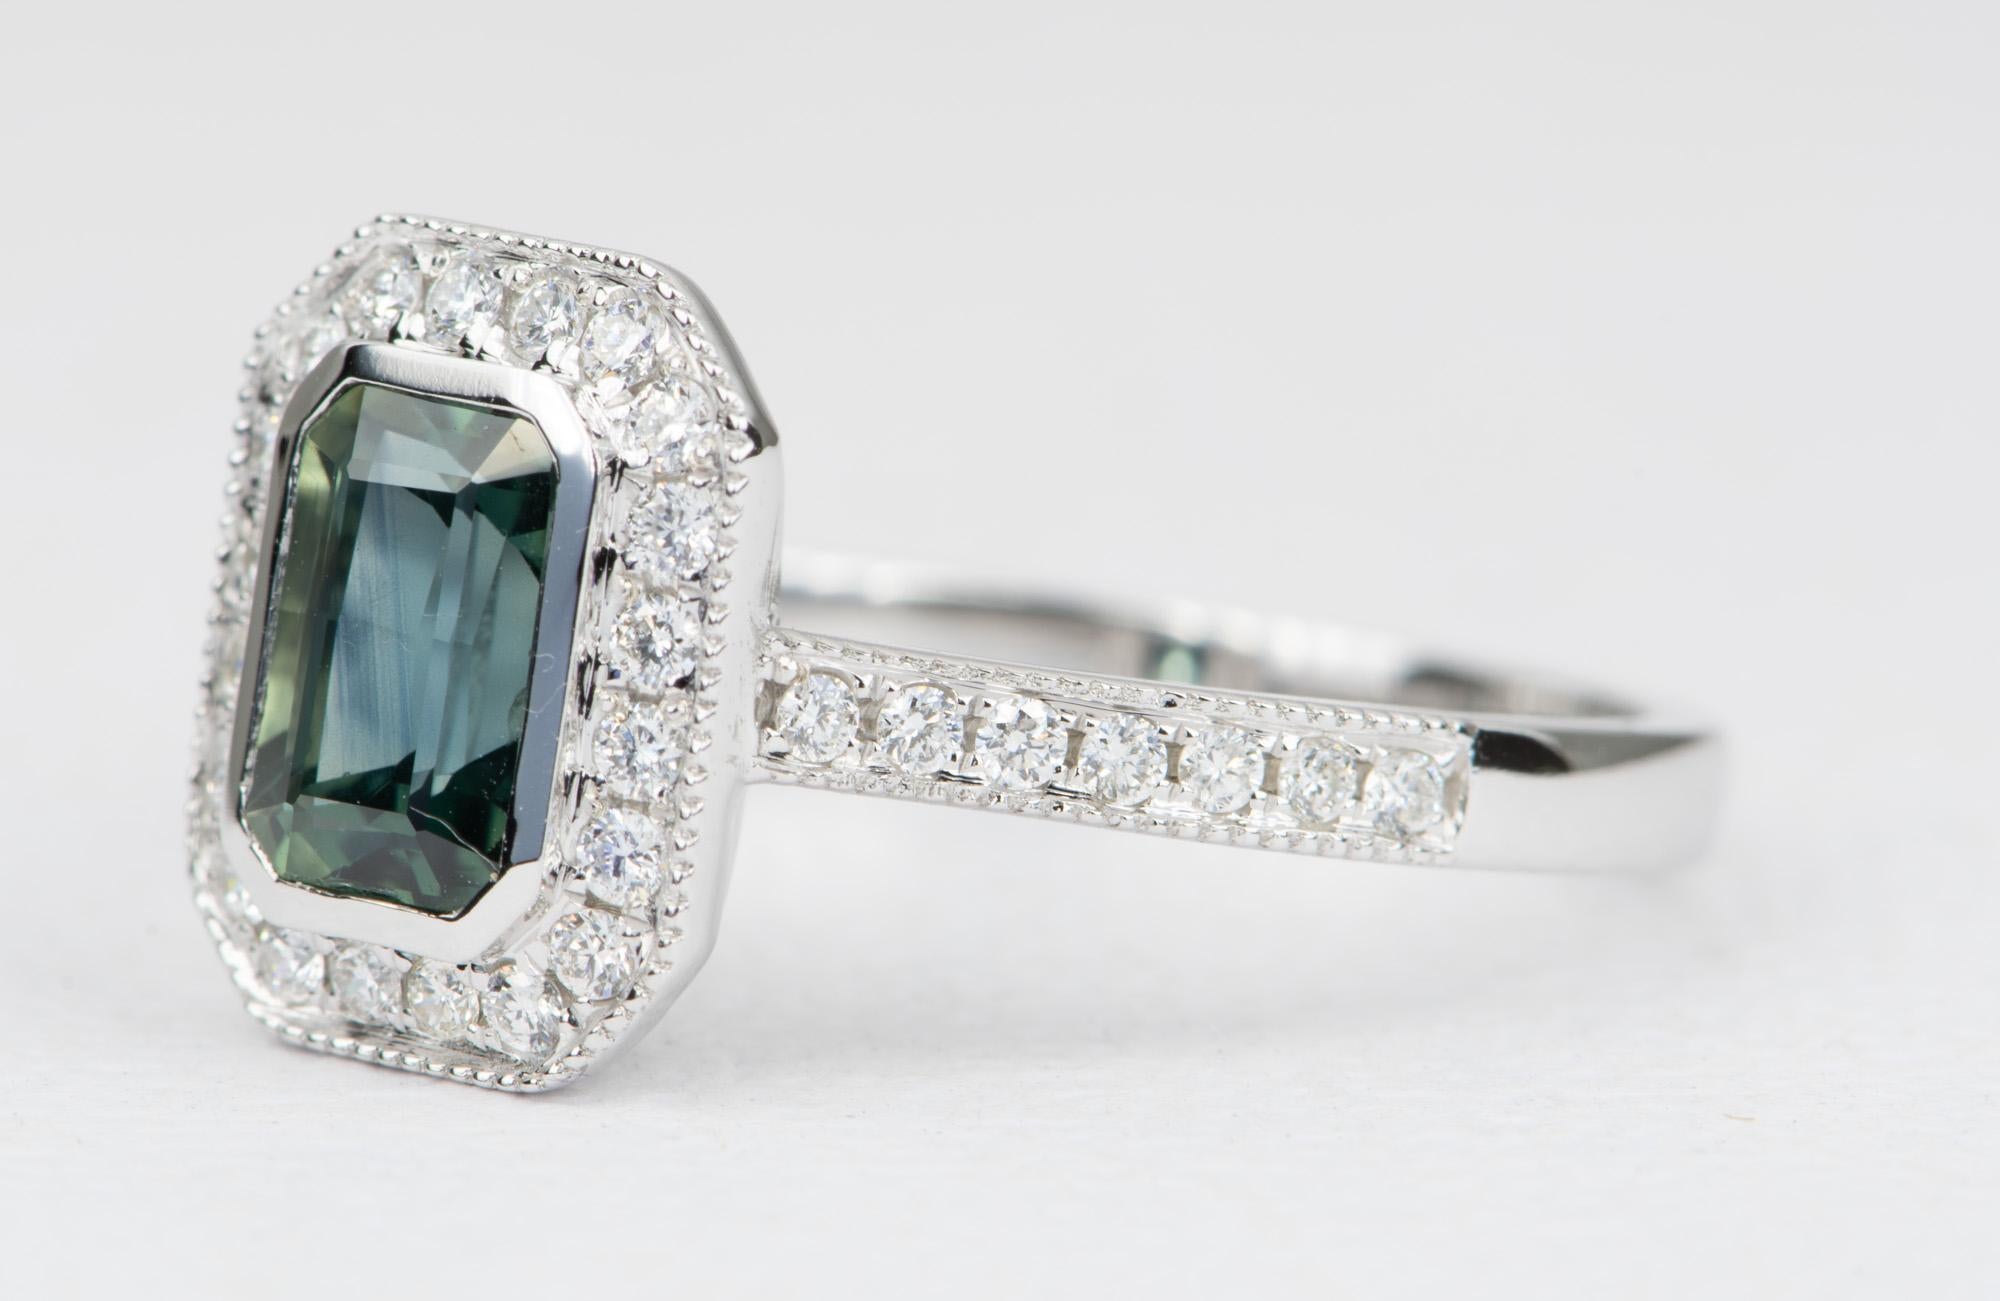 ♥ This 14K white gold ring features a teal blue sapphire in the center, flanked with bright white diamond in a halo style
♥ The shank of the ring is set with delicate milgrain edges and a half eternity diamond pave on the band

♥  Ring size: US 7